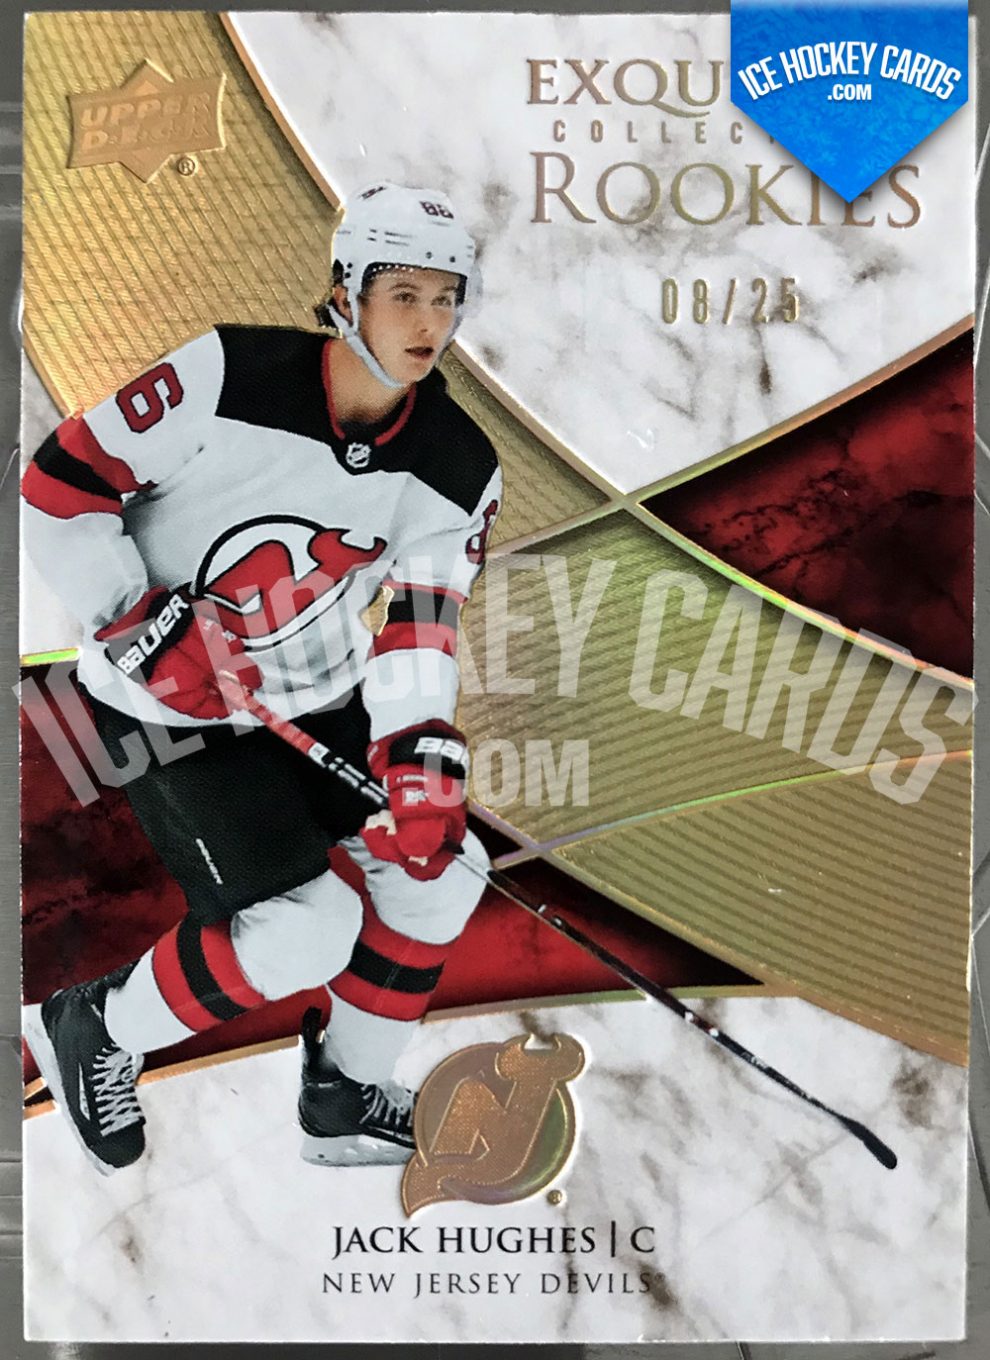  2019-20 Upper Deck NHL Rookie Box Set #1 Jack Hughes New Jersey  Devils Official UD Hockey Trading Card : Collectibles & Fine Art